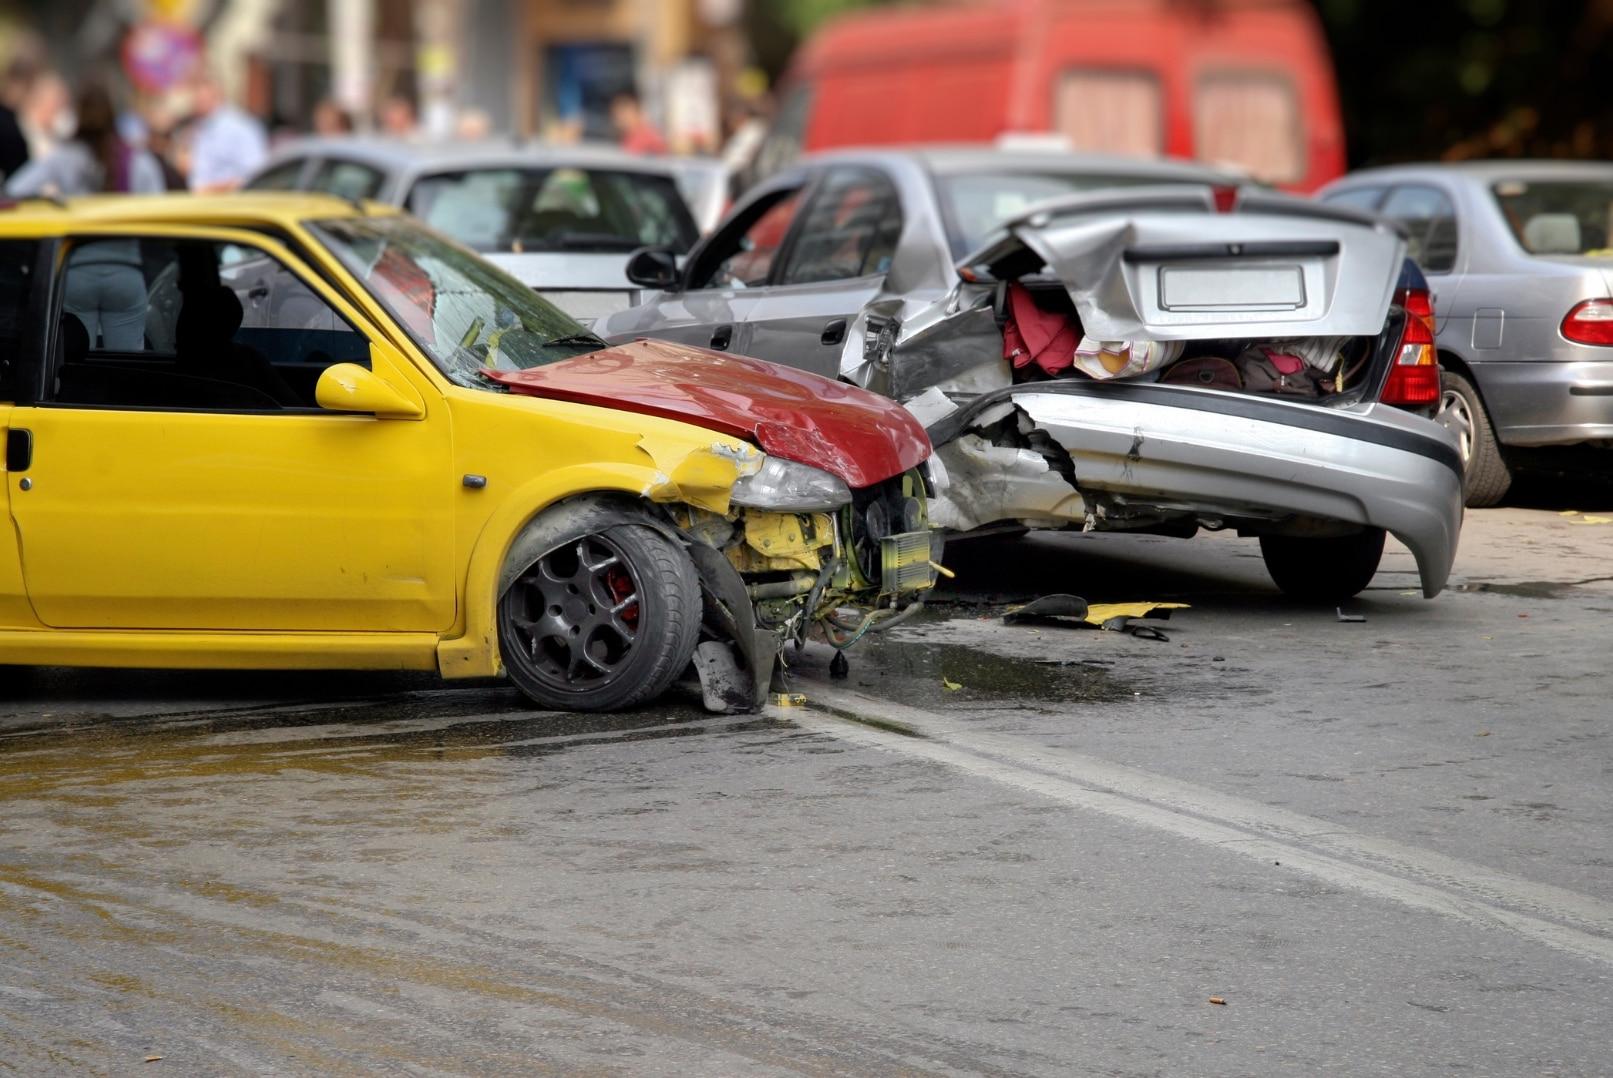 Finding An Acworth Car Accident Lawyer